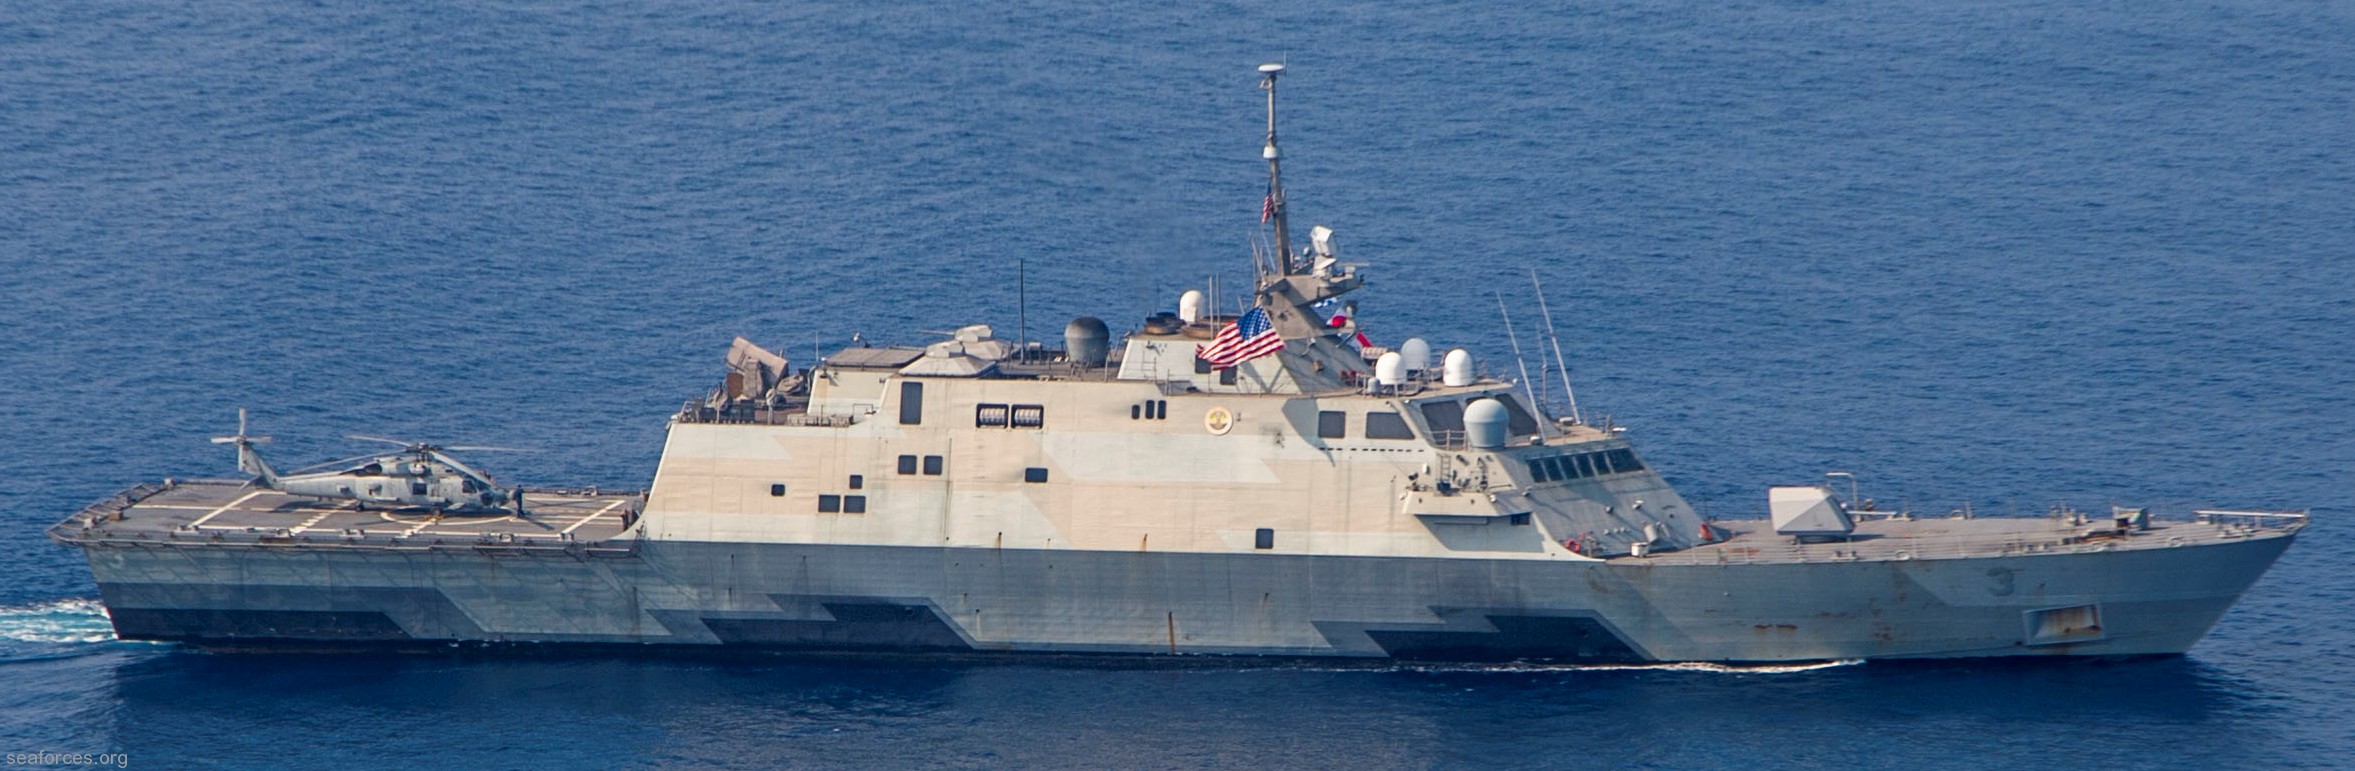 lcs-3 uss fort worth littoral combat ship freedom class us navy 03 exercise malabar 2015